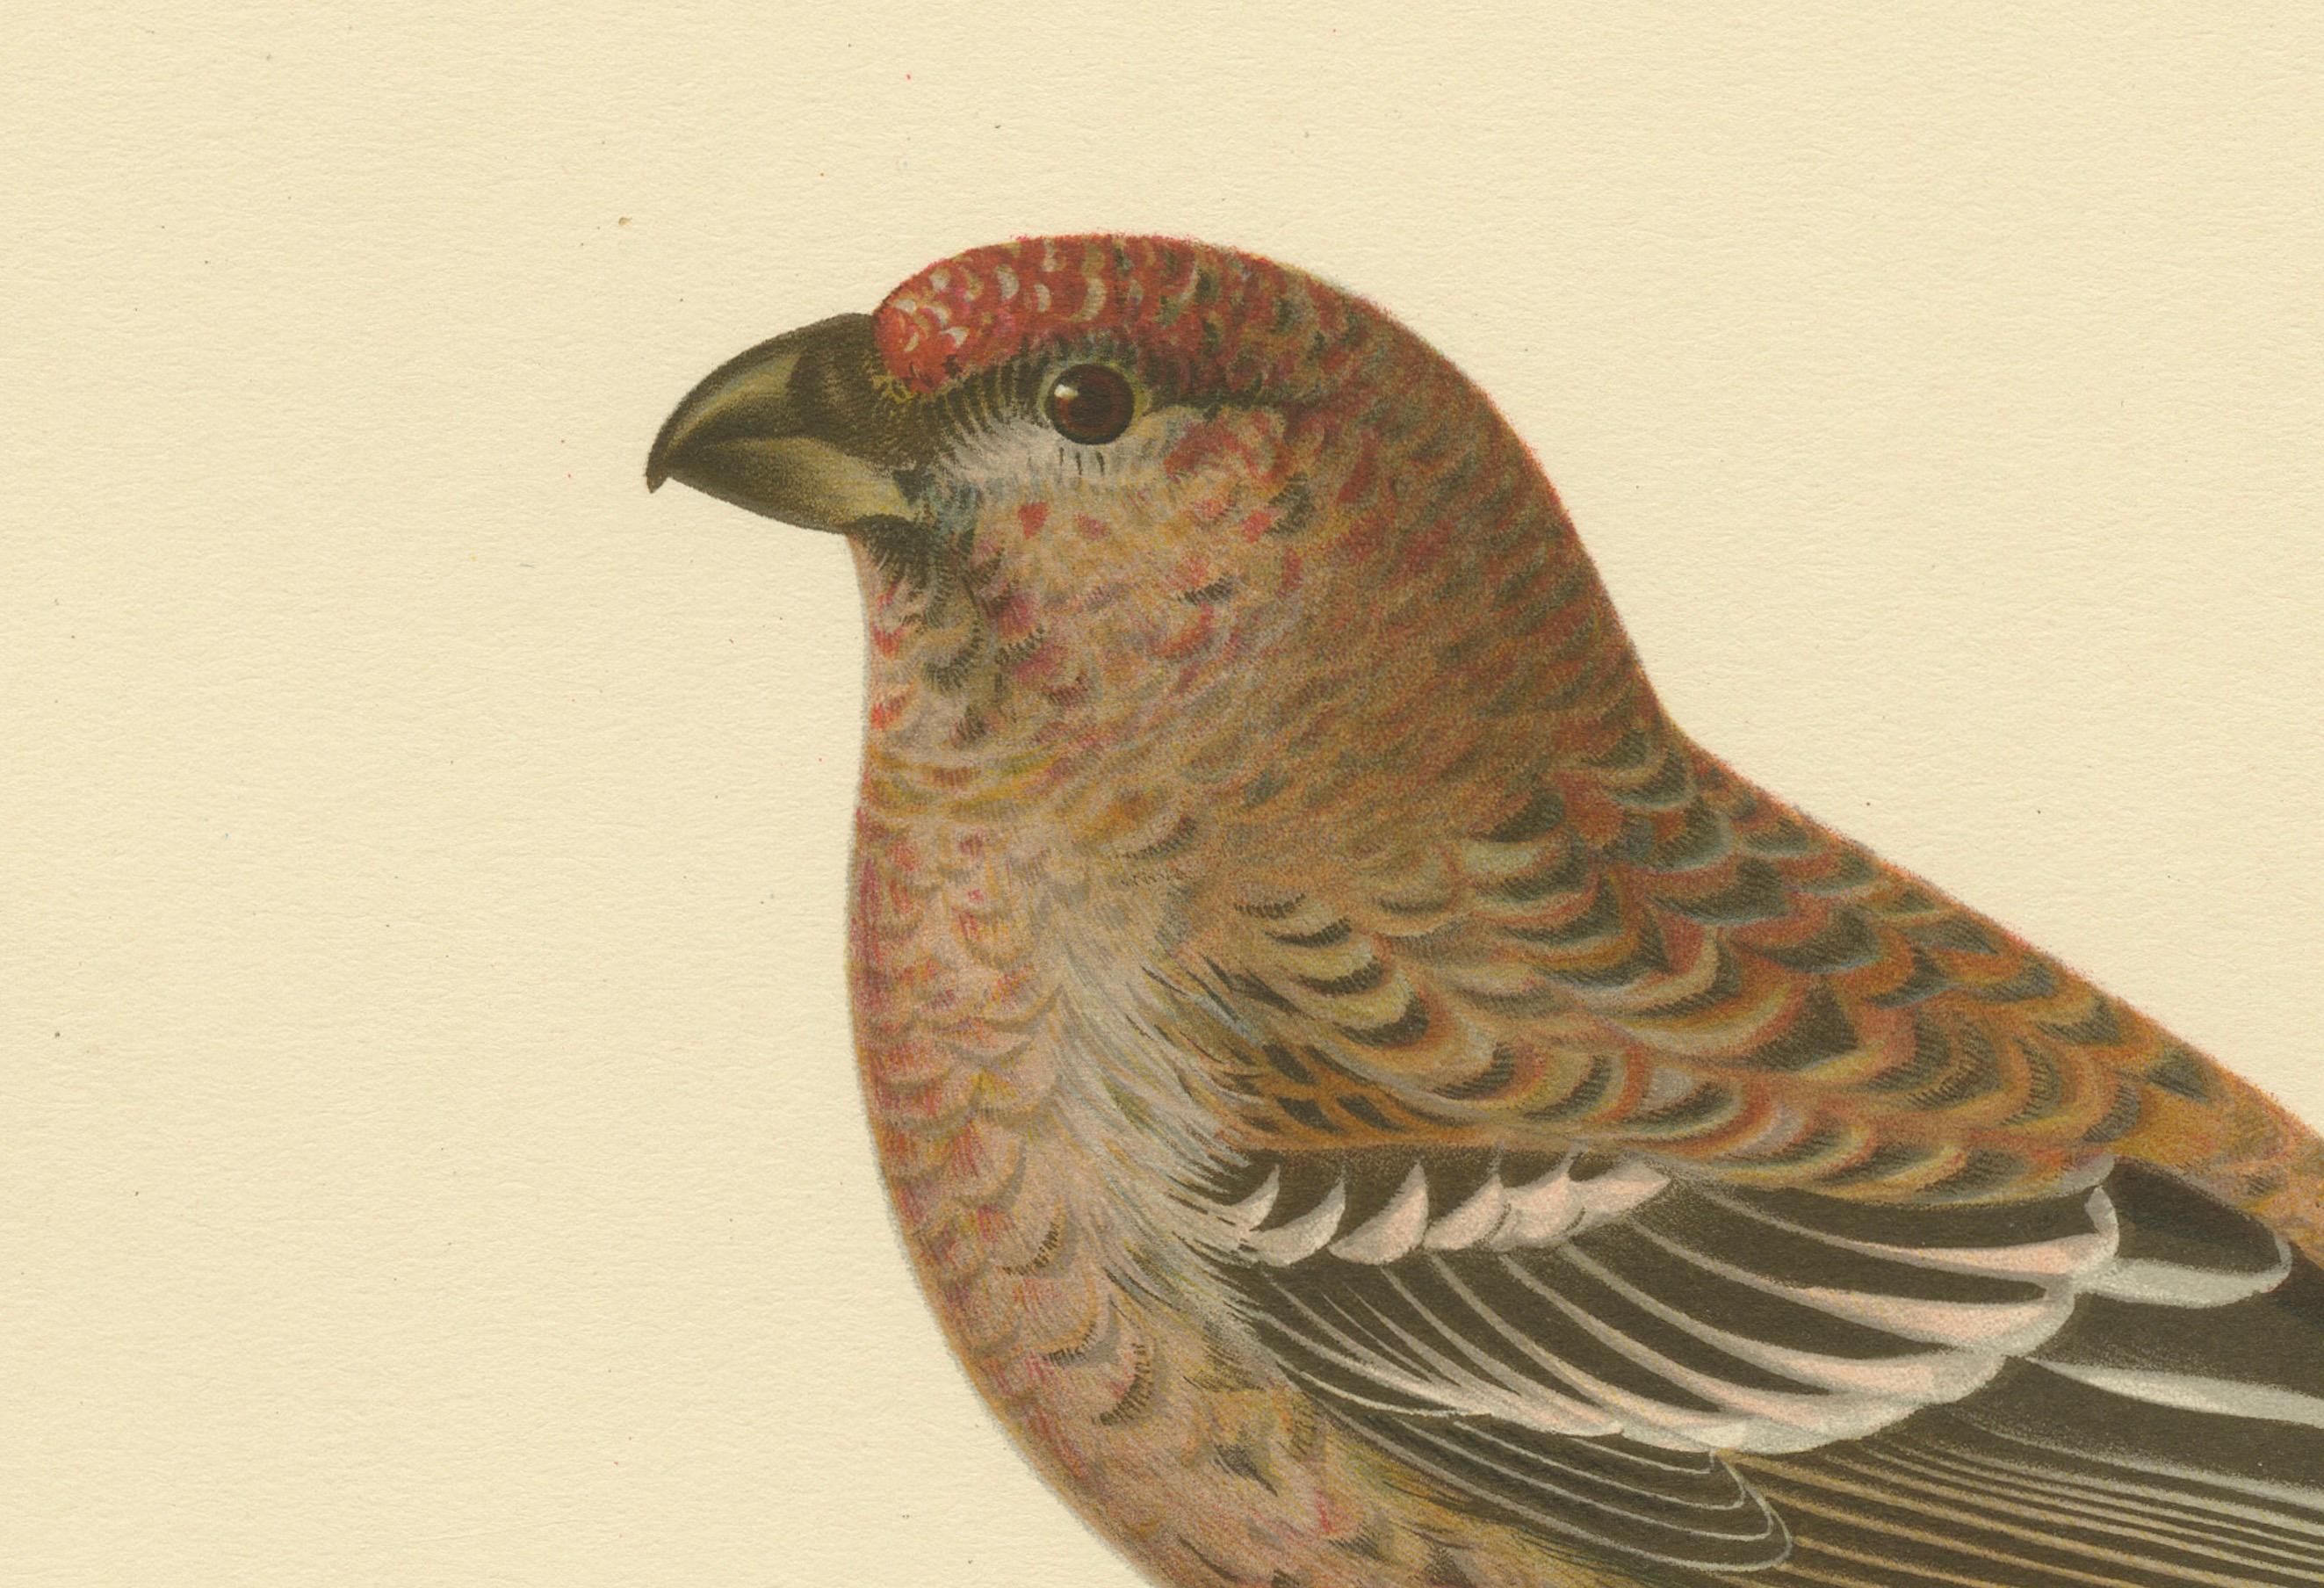 This is an antique print of the Pine Grosbeak, known scientifically as 